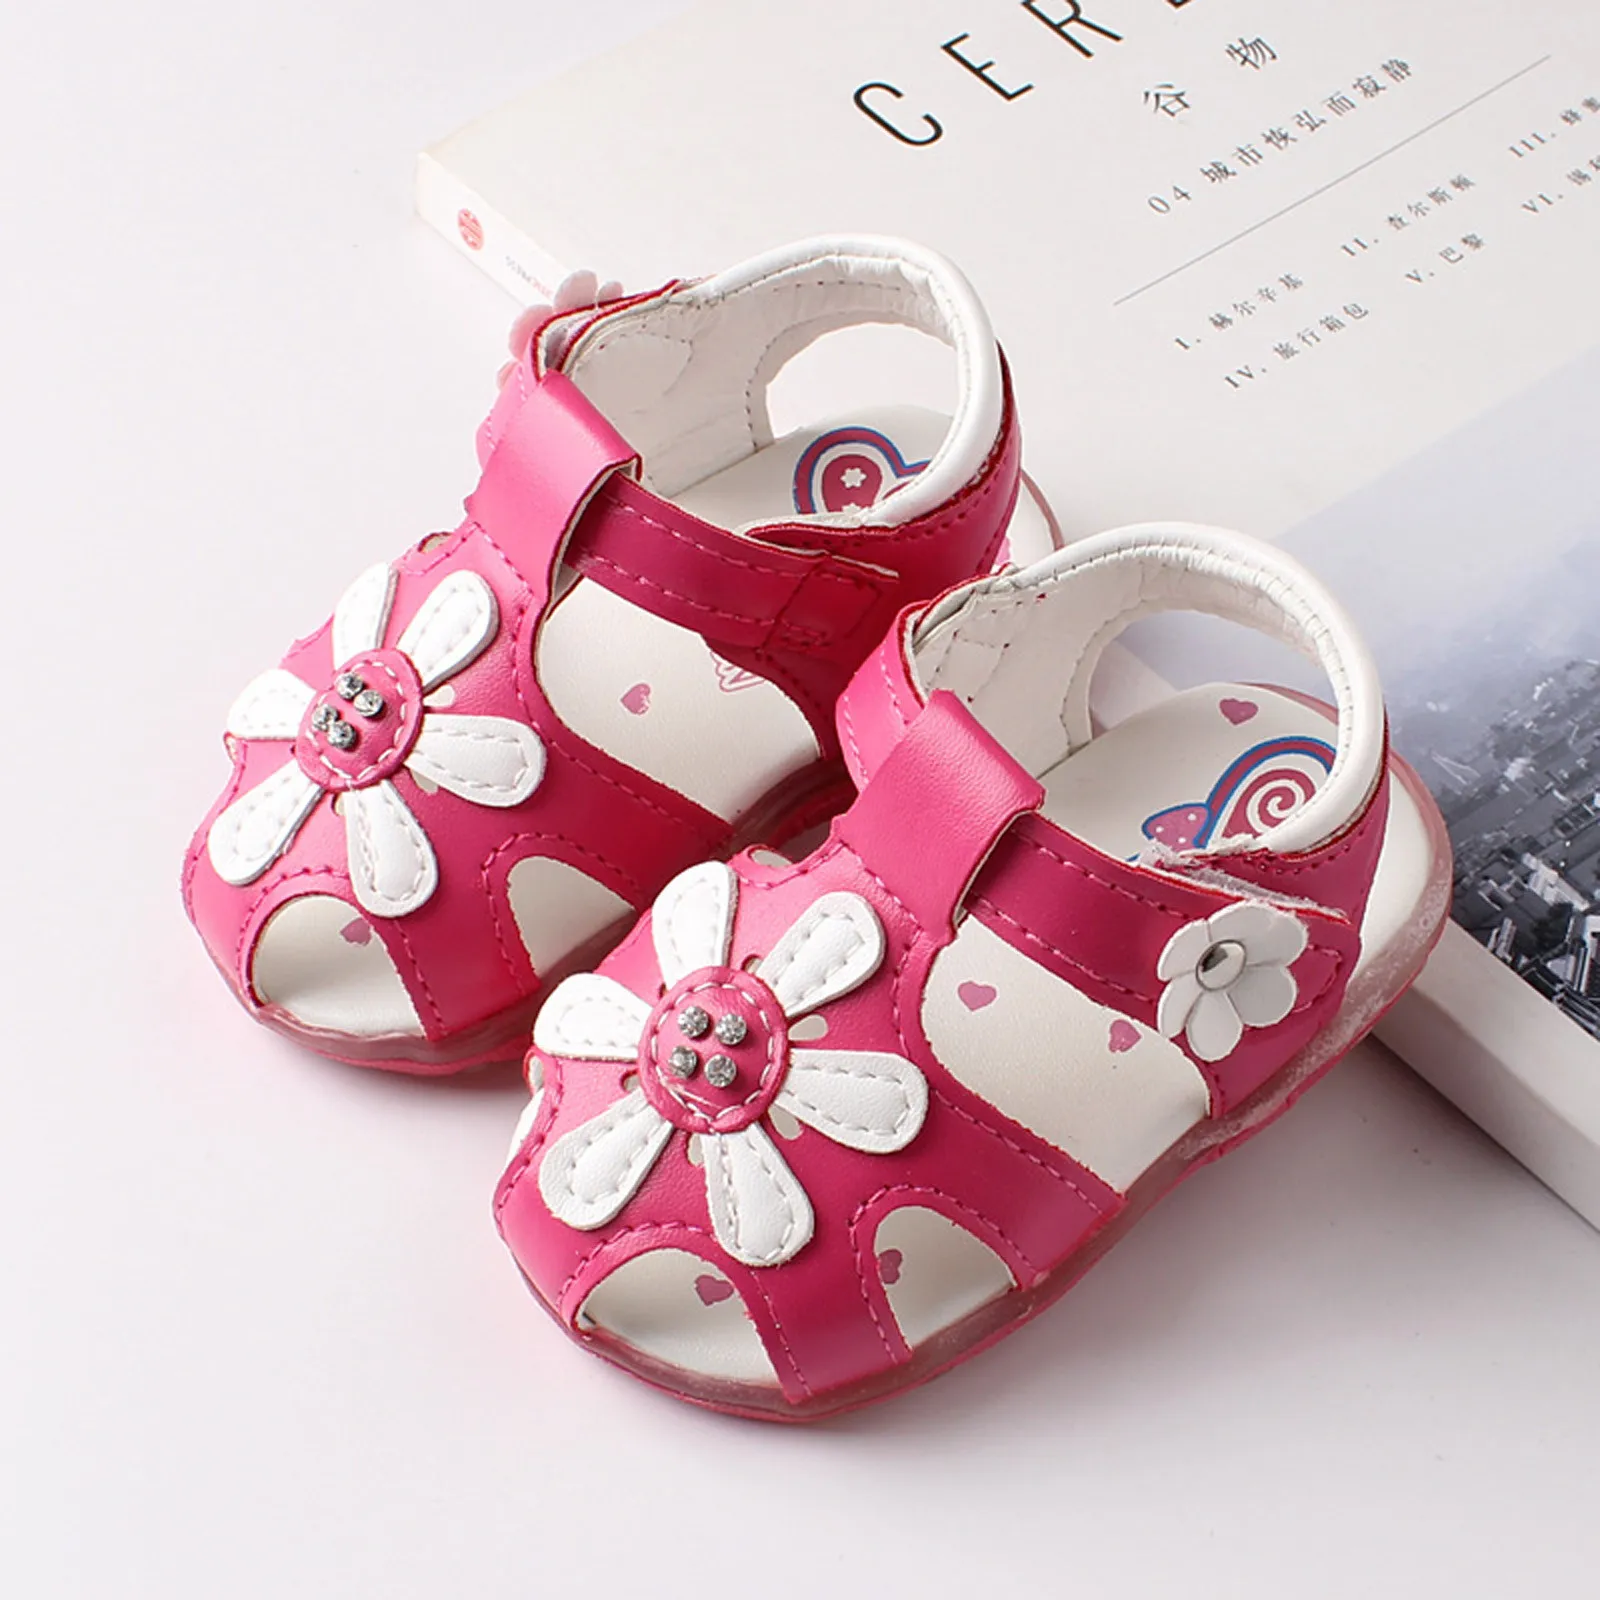 Toddler Infant Kids Baby Girls Cute Flowers LED Luminous Shoes Sneakers Sandals 